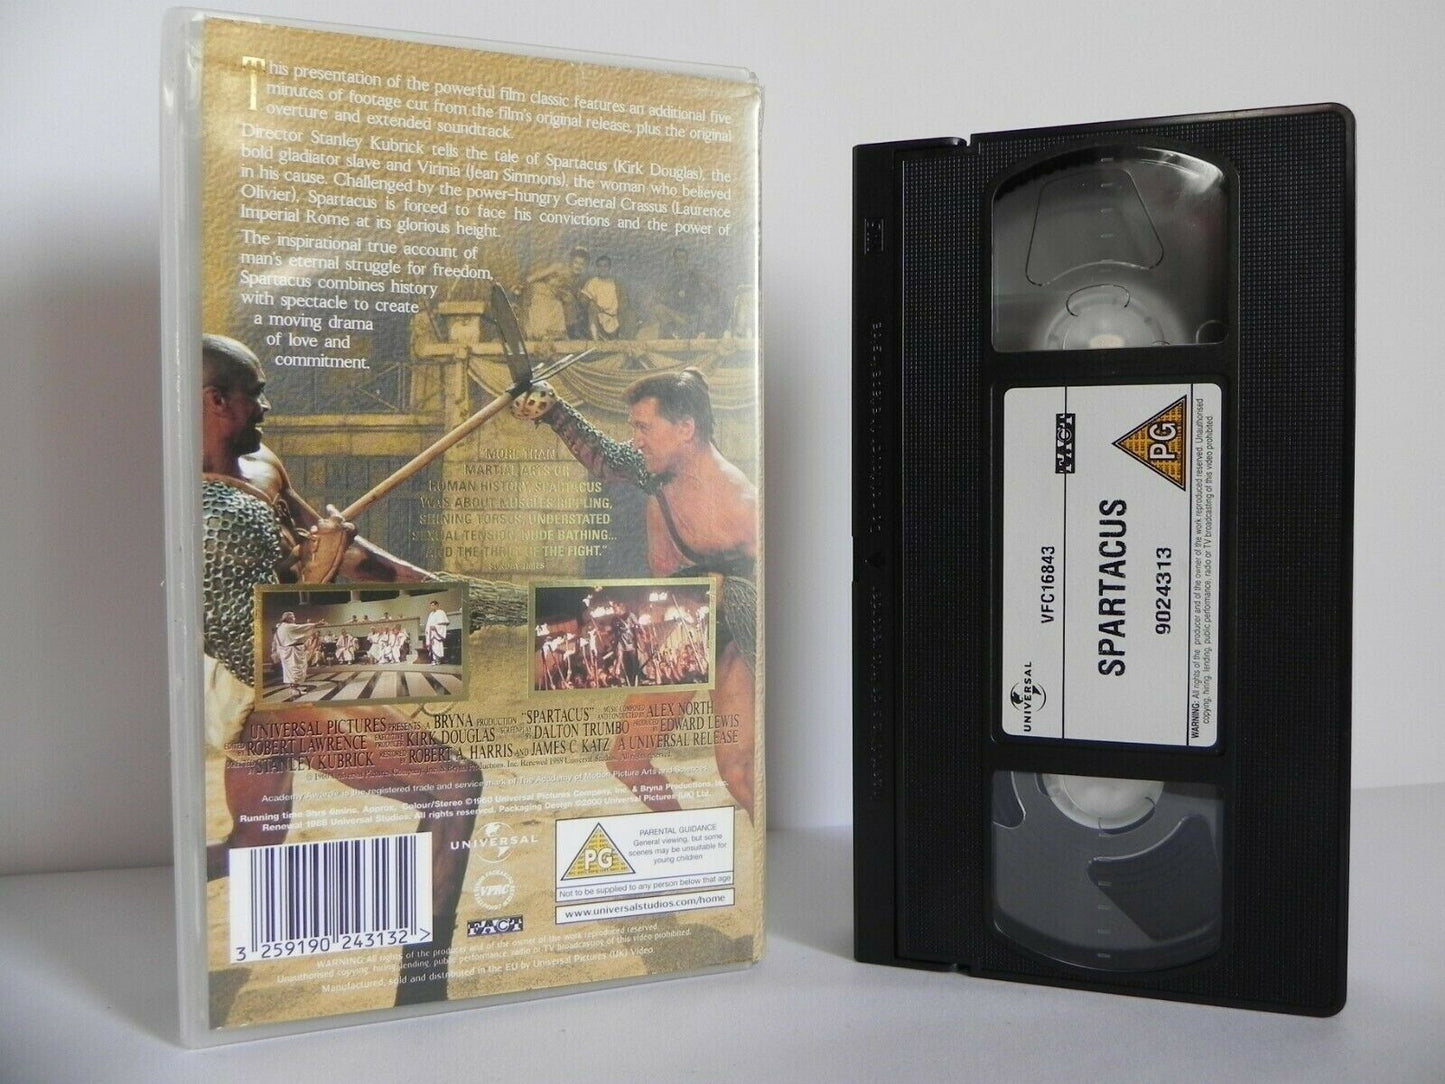 Spartacus - Stanley Kubrick Film - Classic - Uncut - Fully Restored - Pal VHS-